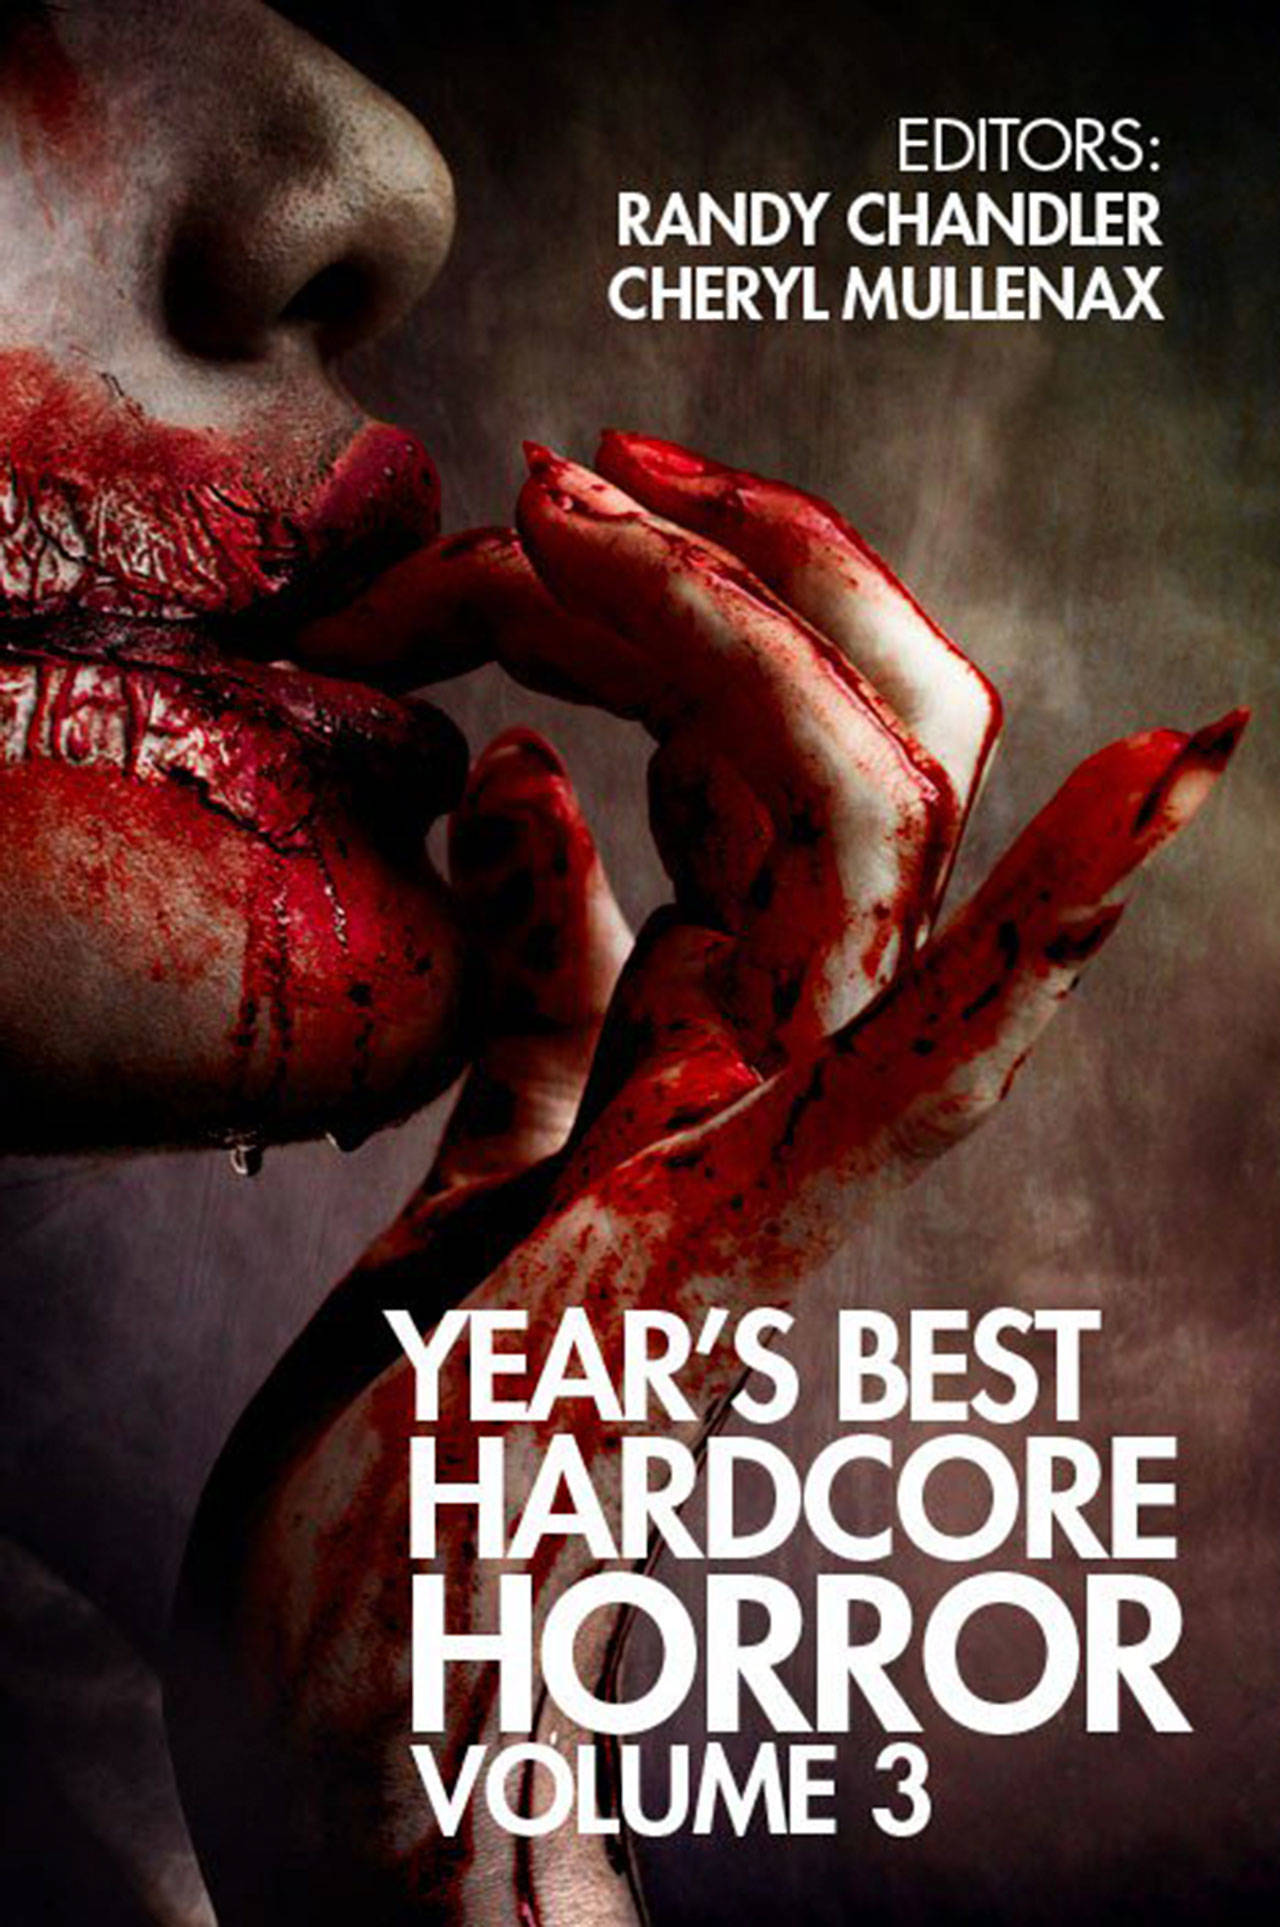 Image courtesy of Red Room Press | Island-based journalist and author, and longtime Review staff writer/photographer, Luciano Marano’s short story “Burnt” was included in the recently published anthology “Year’s Best Hardcore Horror Vol. 3.”